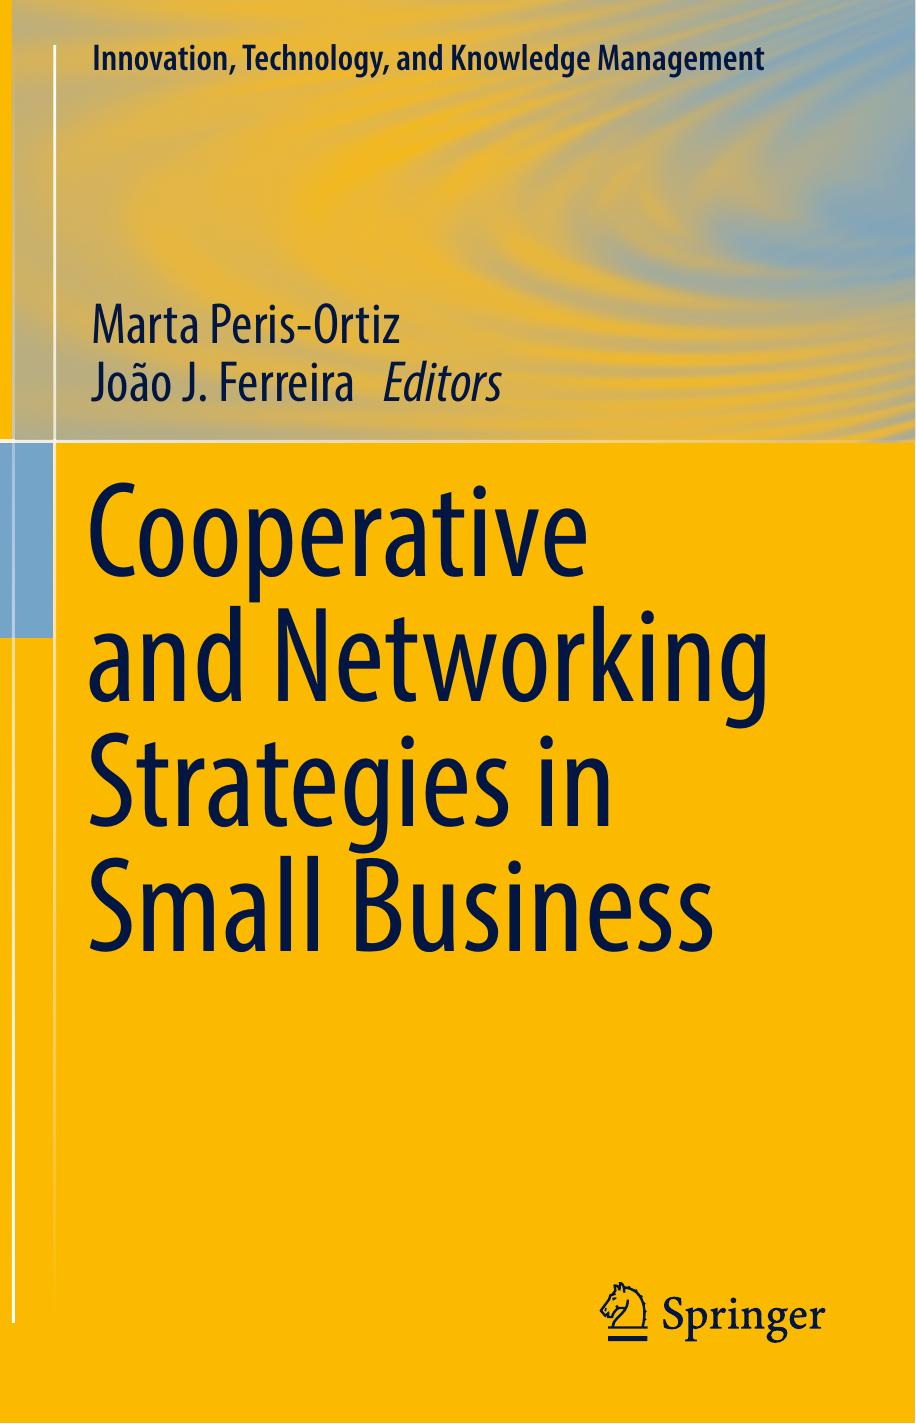 Cooperative and Networking Strategies in Small Business ( PDFDrive ) 2017